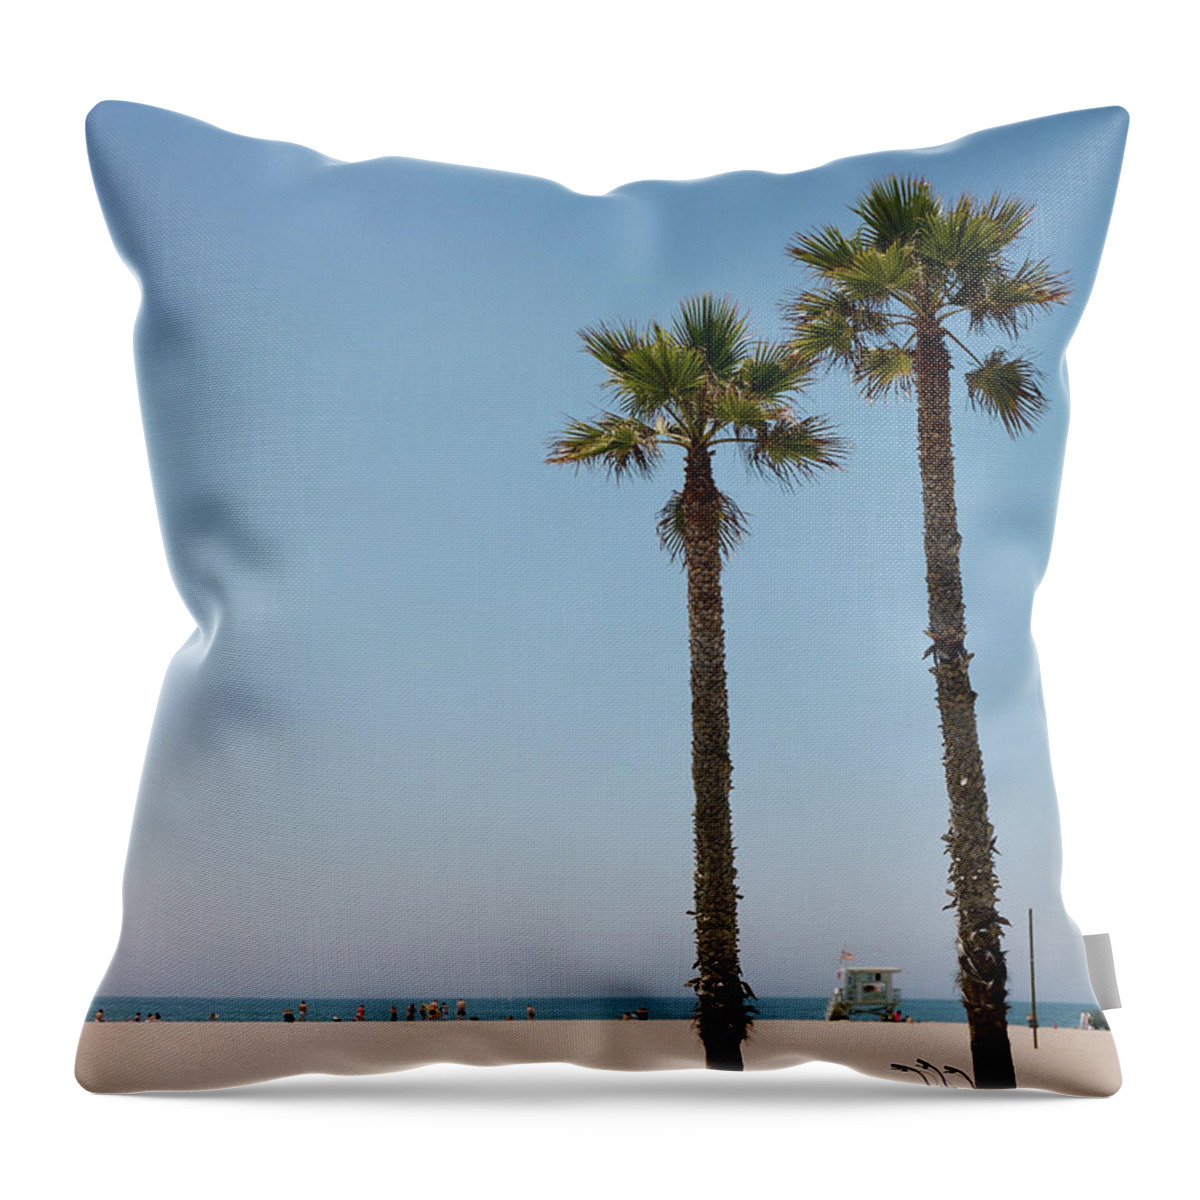 Tranquility Throw Pillow featuring the photograph Bicycle Leaning On Palm Tree At Beach by Jörgen Persson - Www.rebusfilm.se